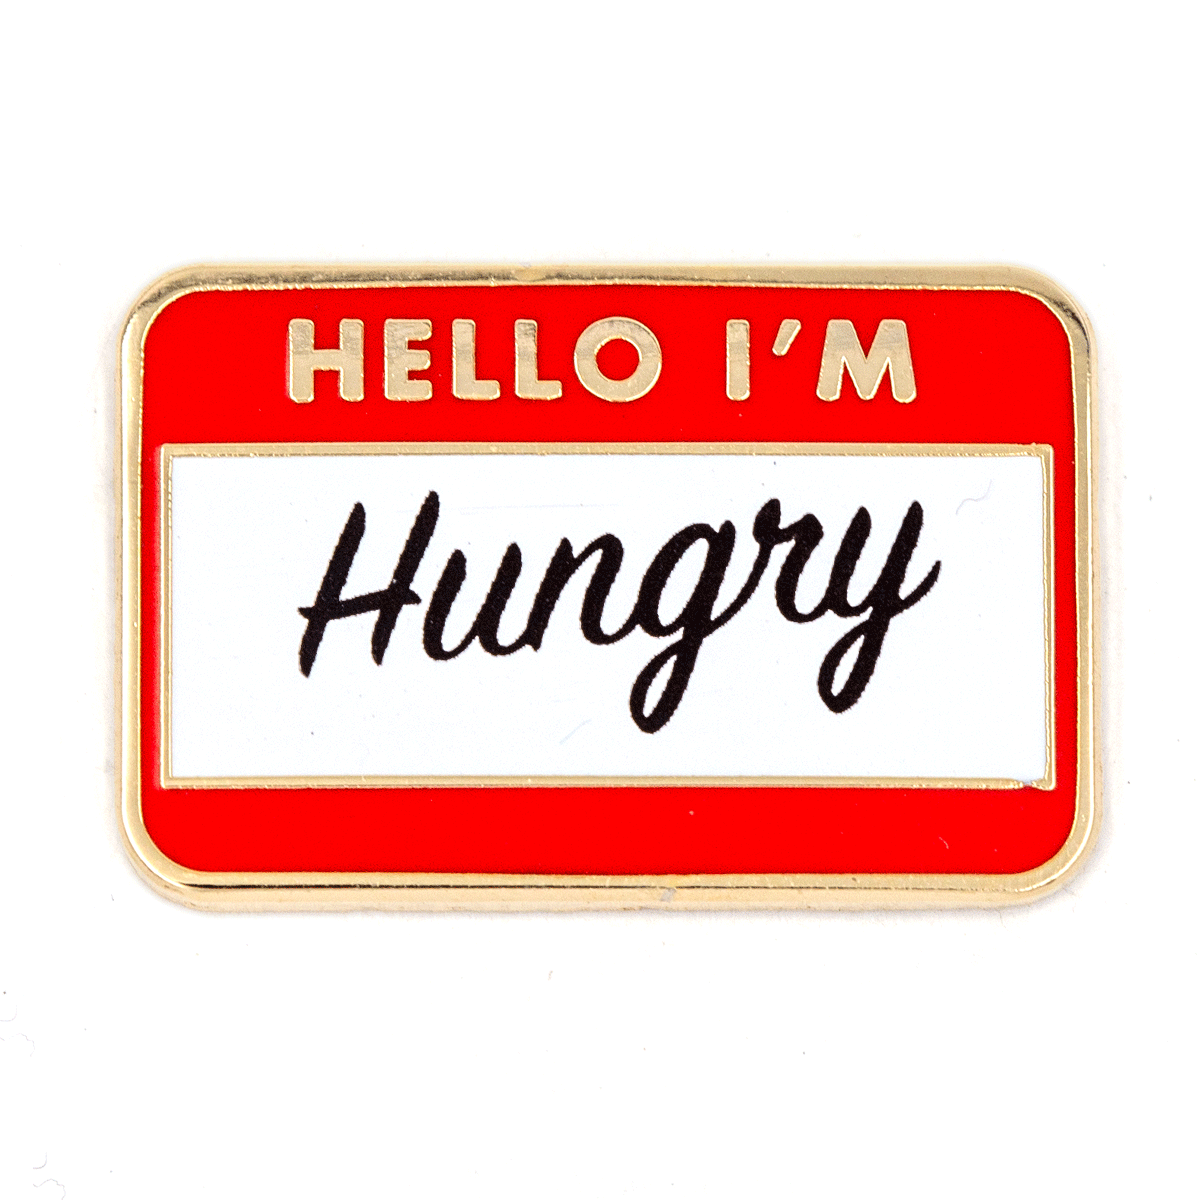 These Are Things - Hello I'm Hungry Enamel Pin